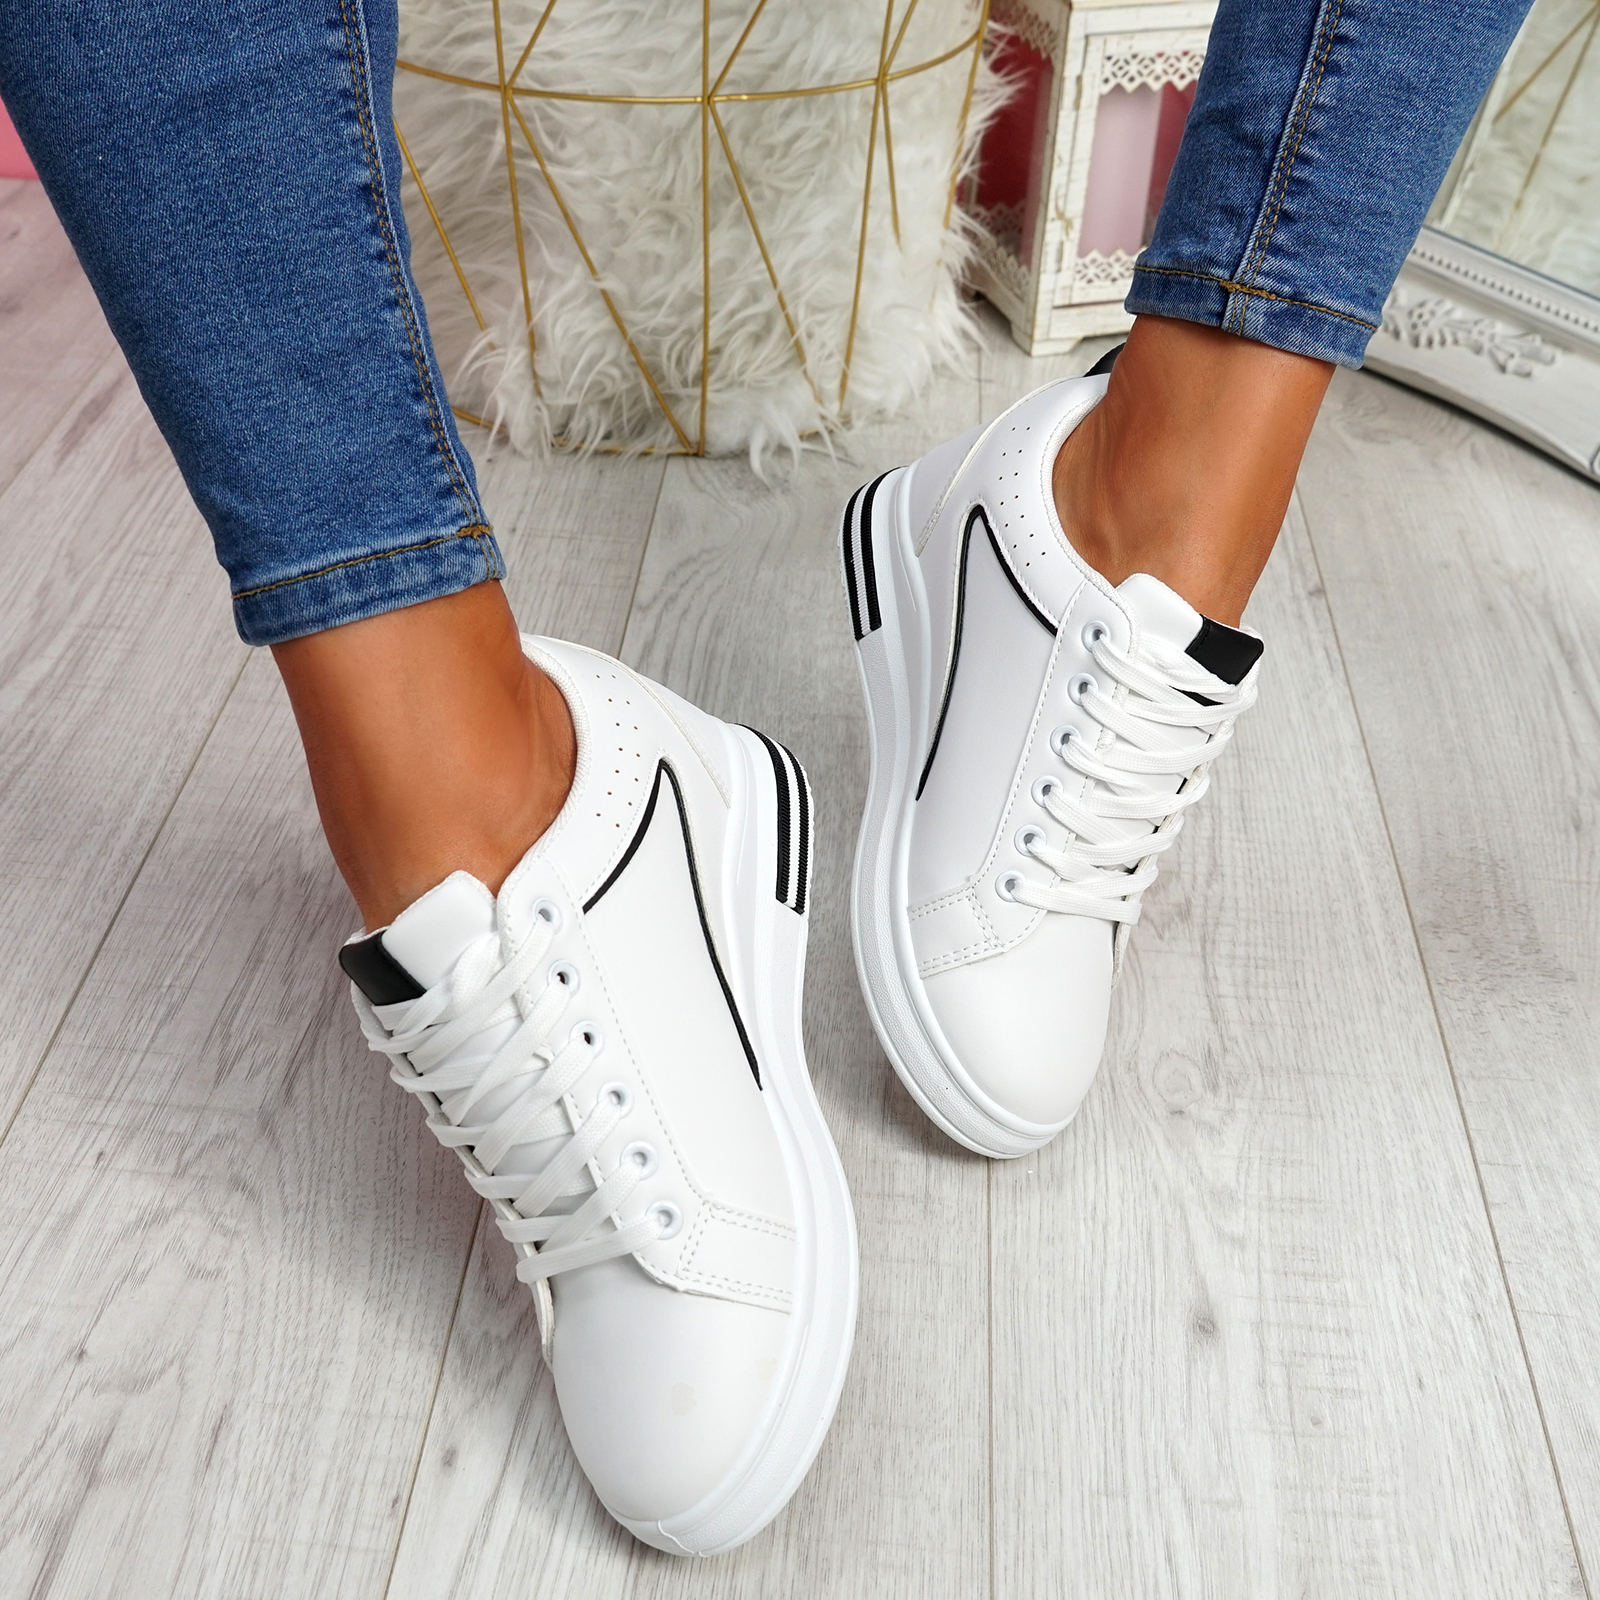 WOMENS LADIES LACE UP WEDGE TRAINERS ANKLE SNEAKERS BOOT PARTY WOMEN ...